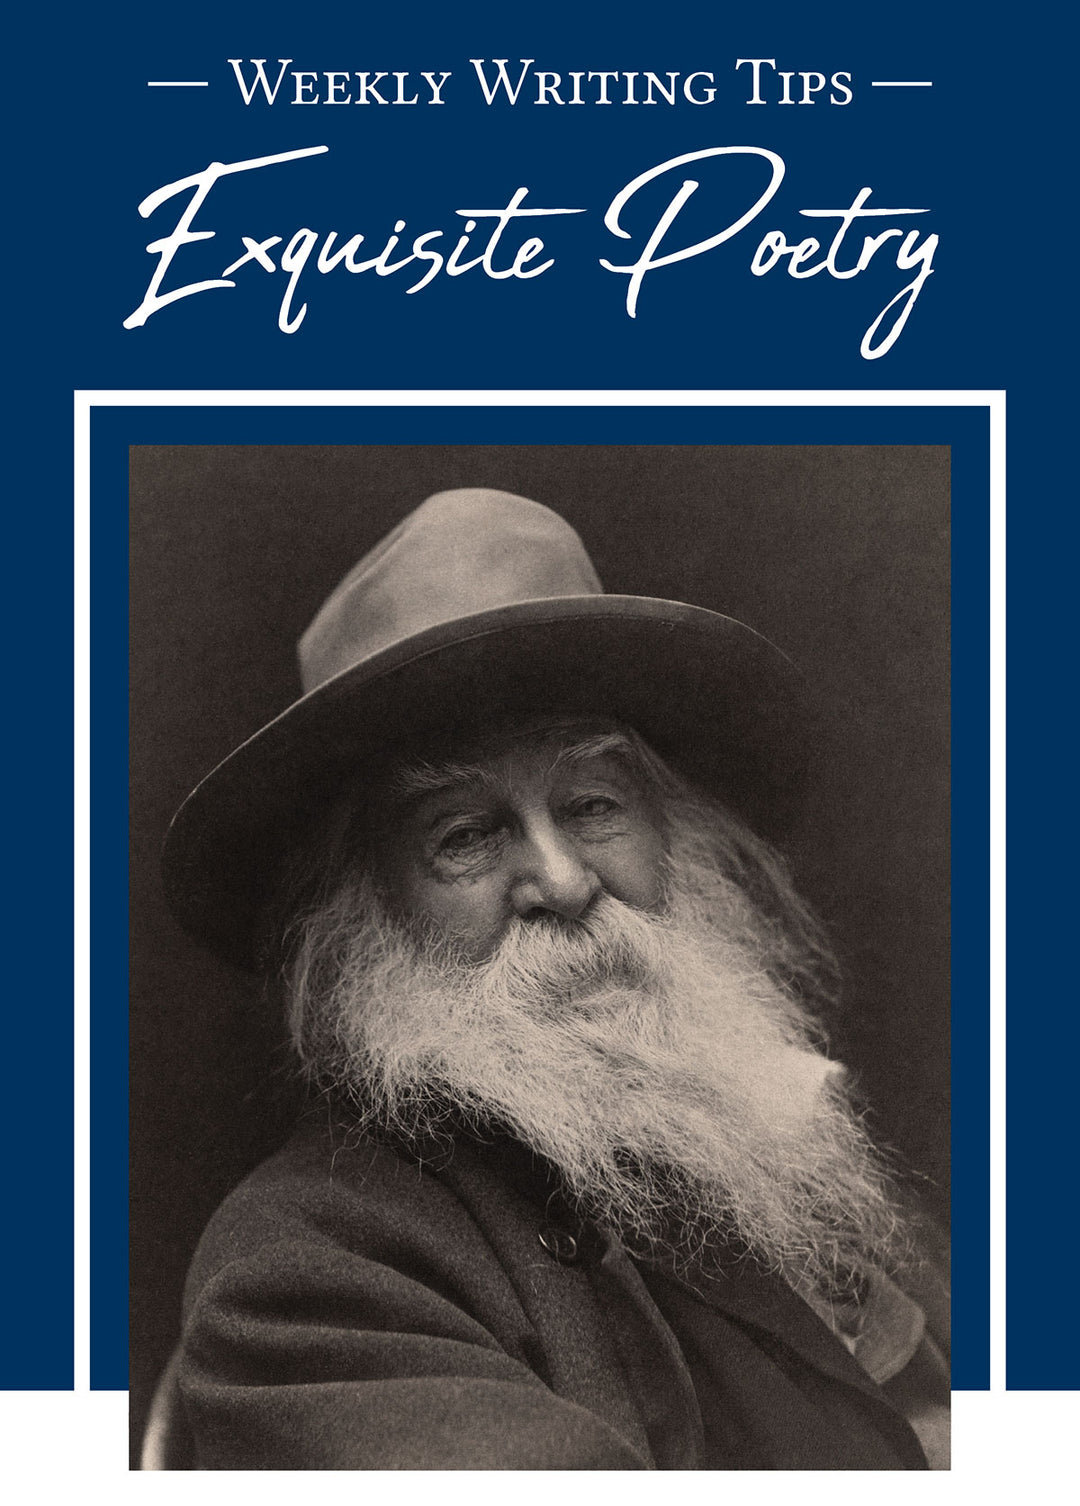 -Weekly Writing Tips- Exquisite Poetry (Pictured: Black and white photograph of Walt Whitman)